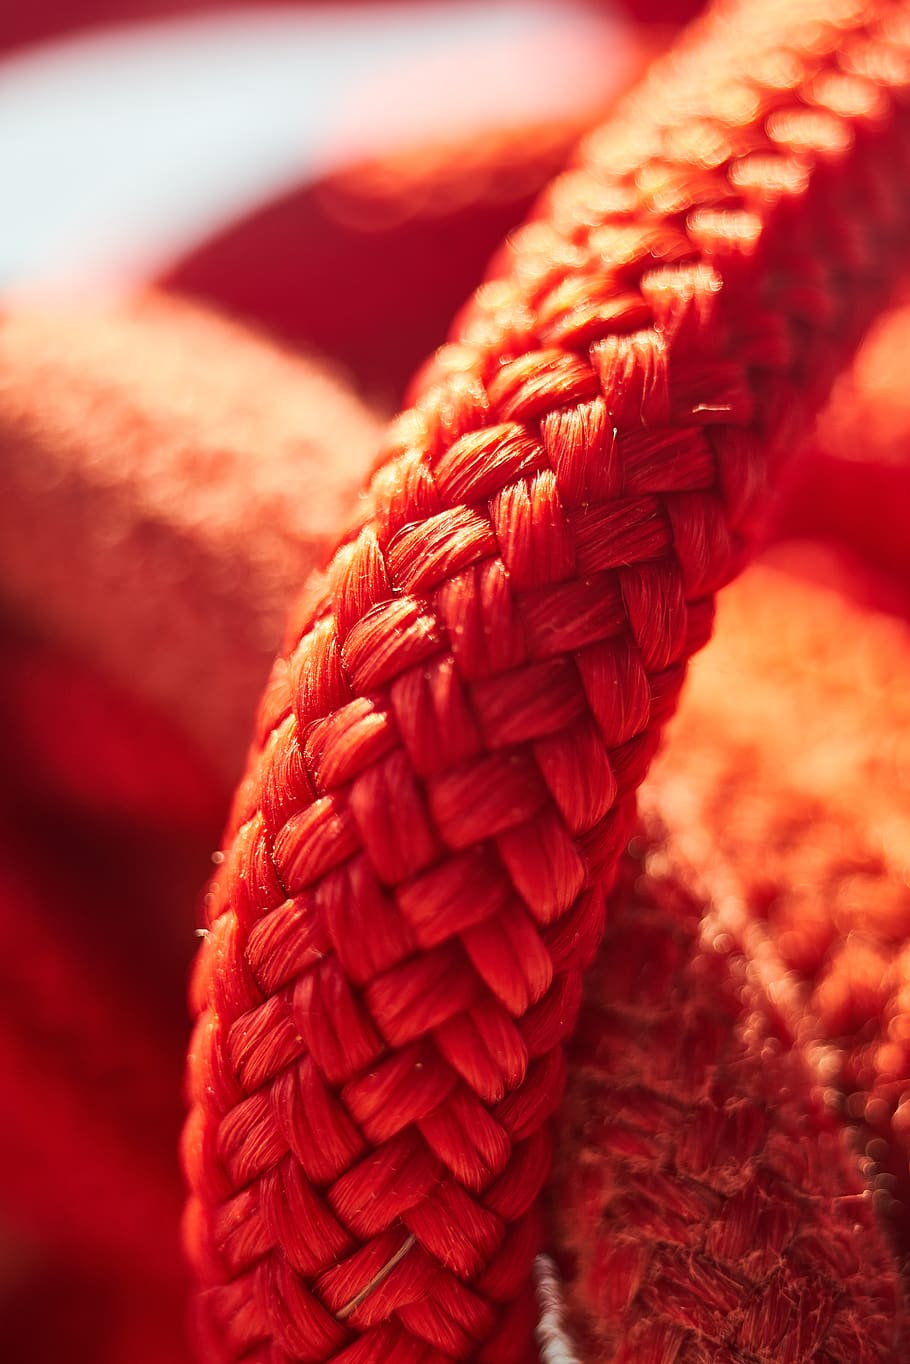 rope, texture, red, yarn, maritime, solid, connect, node, iskele, background